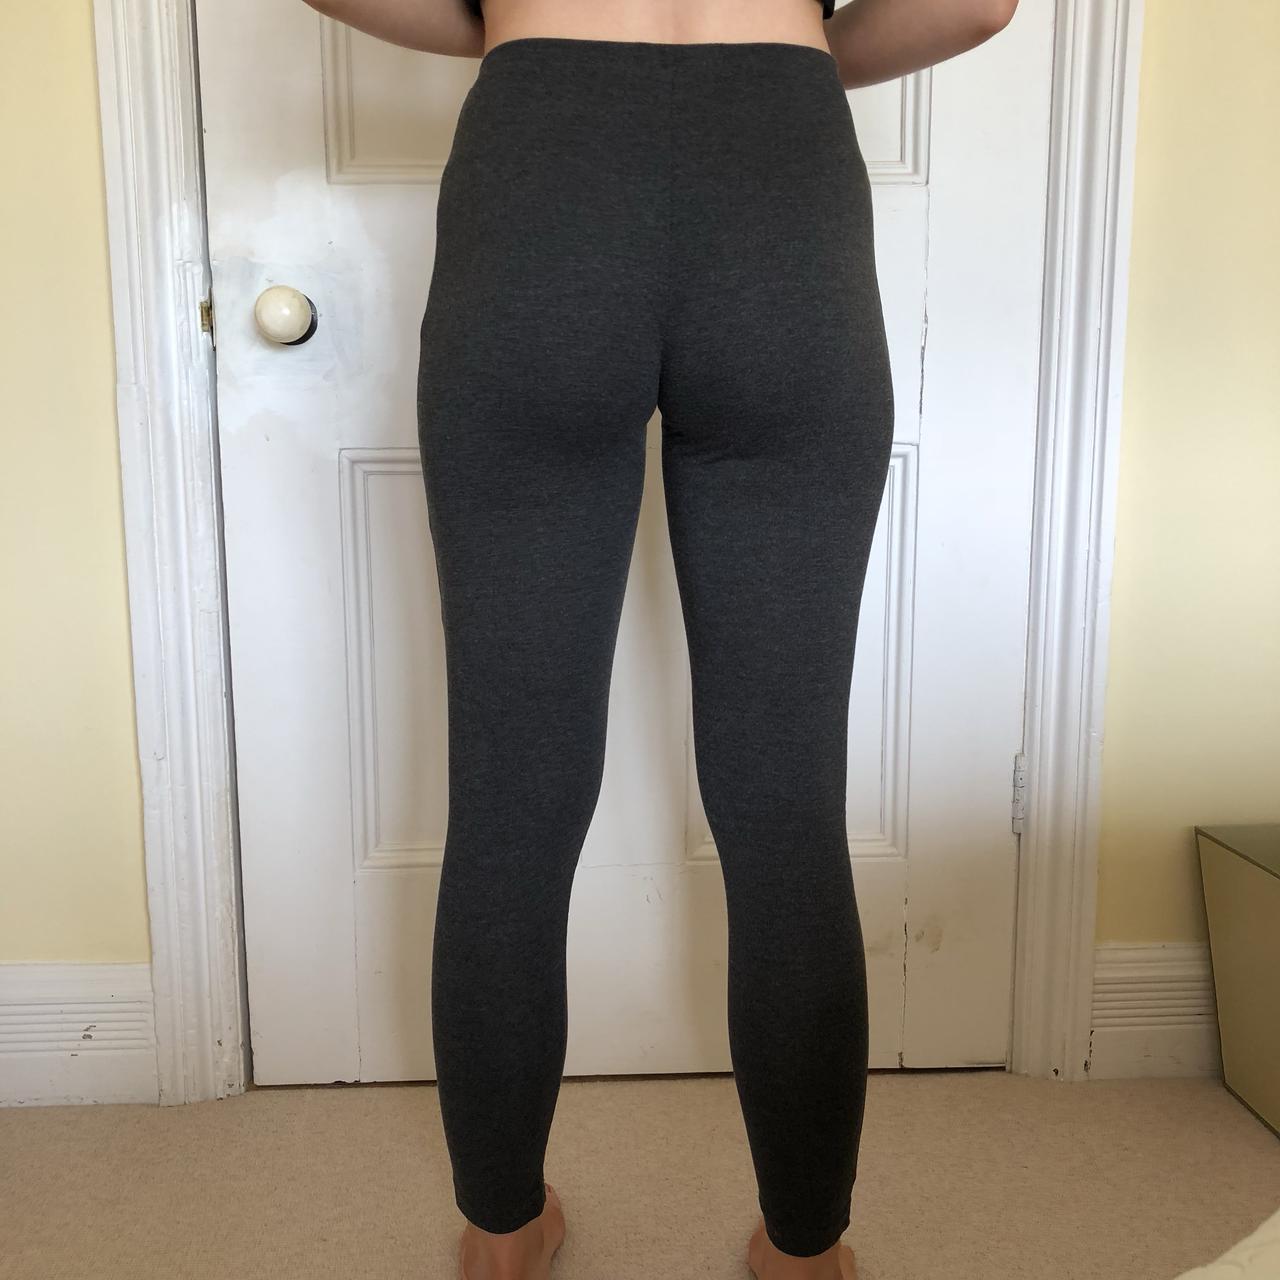 Grey Primark leggings Cozy and great for lounging - Depop